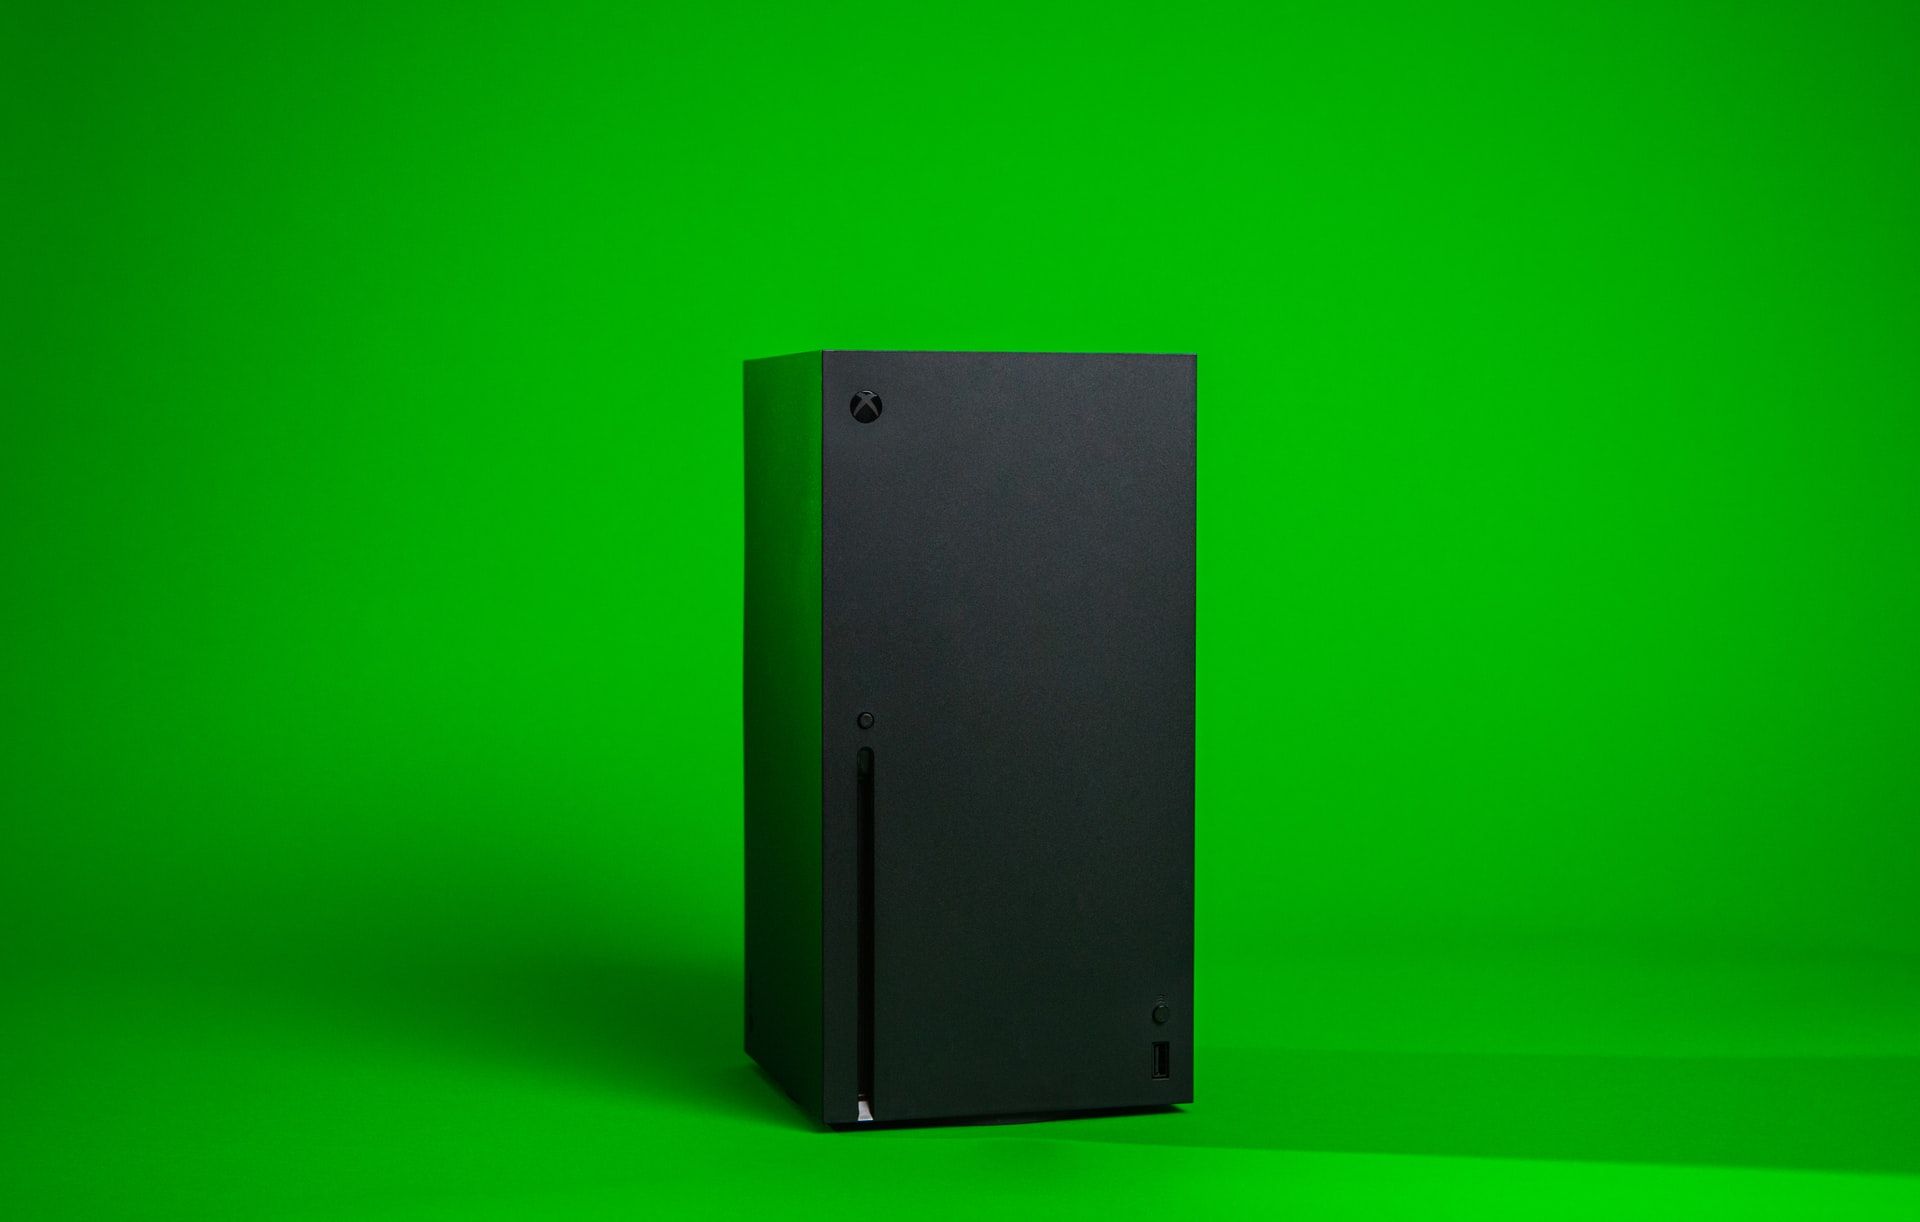 Xbox console in front of a green background